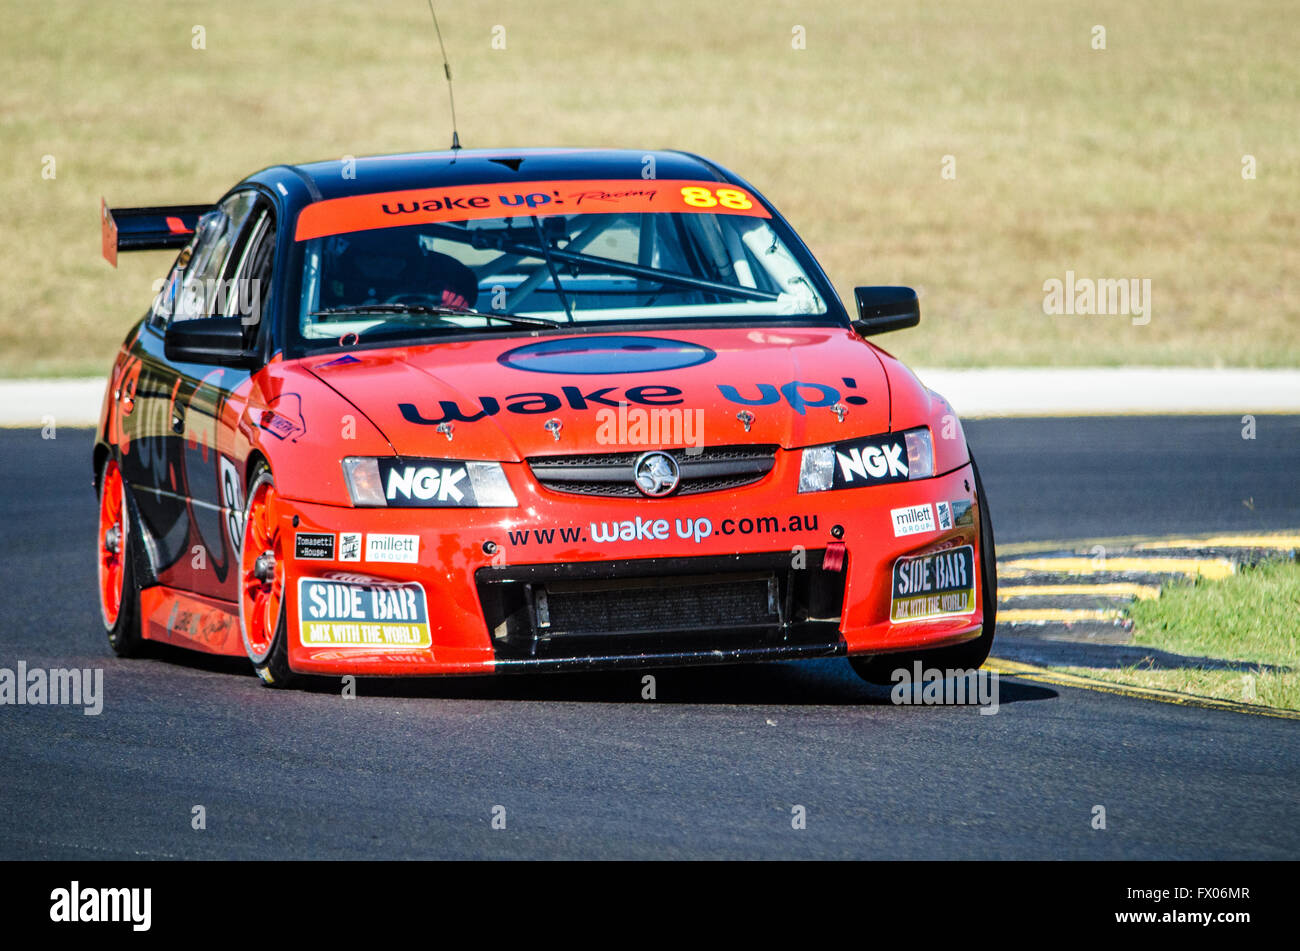 Sydney, Australia. 09th Apr, 2016. Sydney Motorsport Park played host to the New South Wales Motor Race Championships Round 2 qualifying sessions which included Supersports, Sports Sedans, Formula Cars, Improved Production, Formaula Vee and the Veloce Alfa catergory racing. Credit:  Mitchell Burke/Pacific Press/Alamy Live News Stock Photo